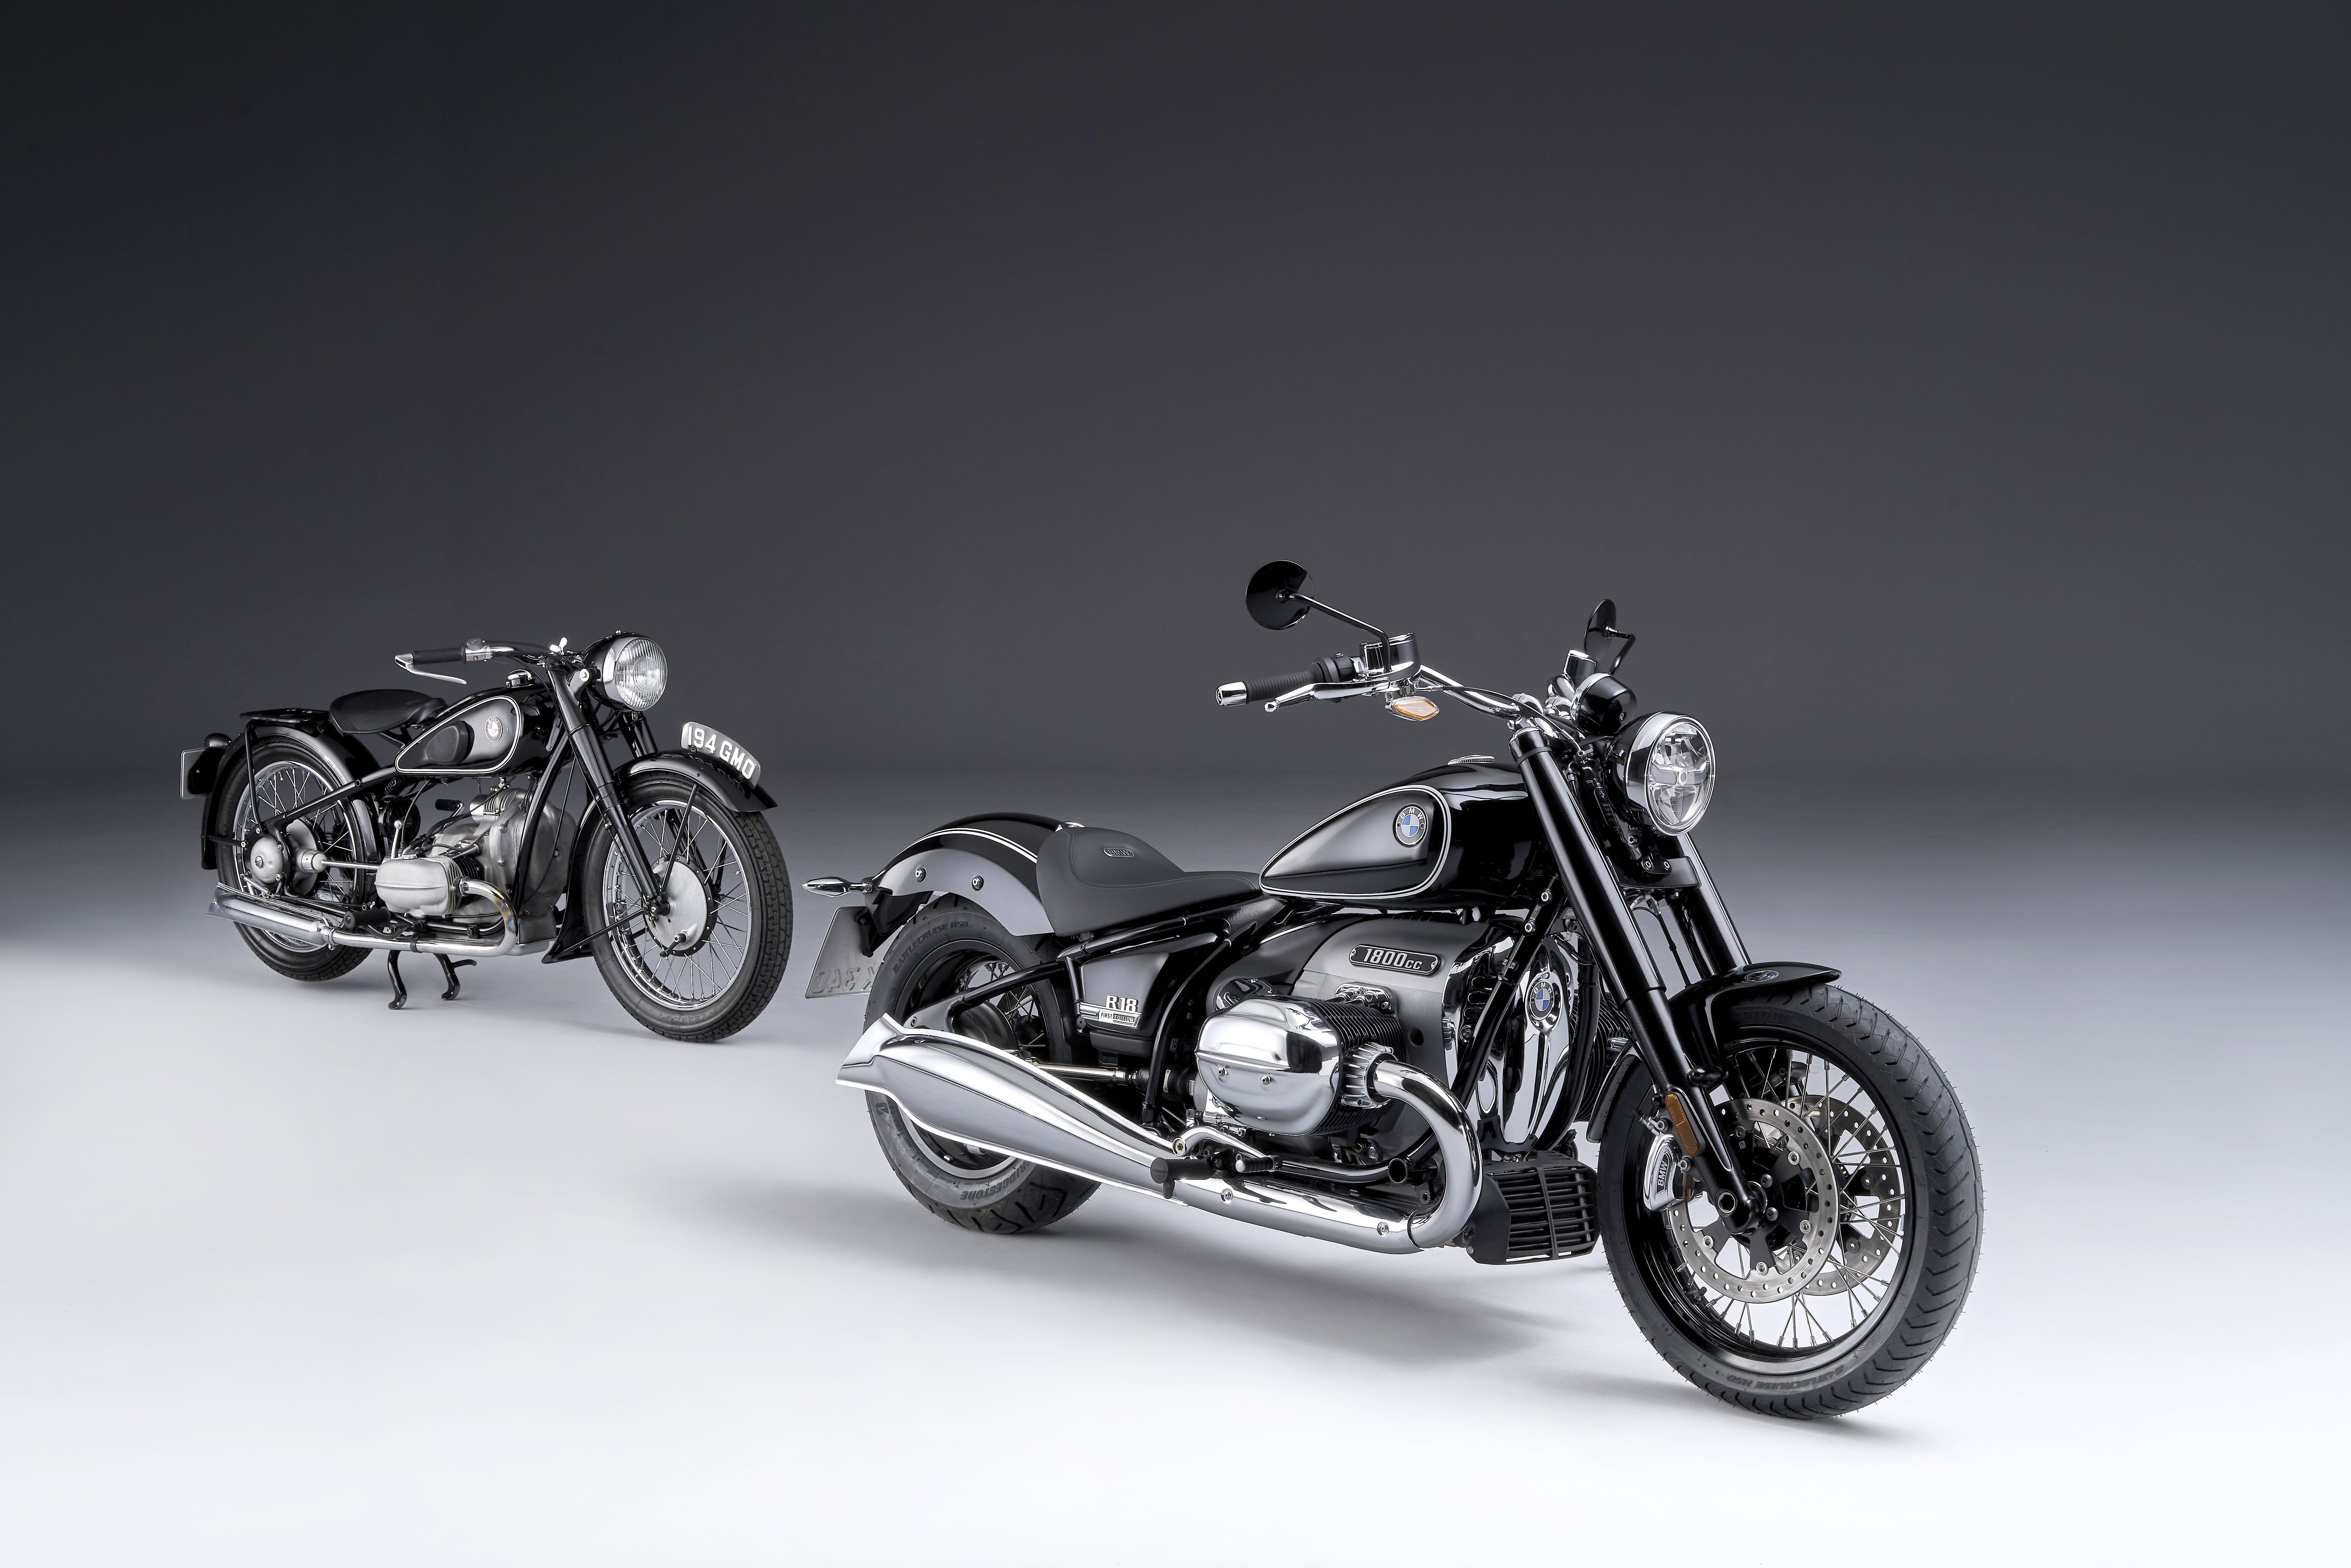 The New BMW R 18 Cruiser Is a Hunk of Retro-Cool